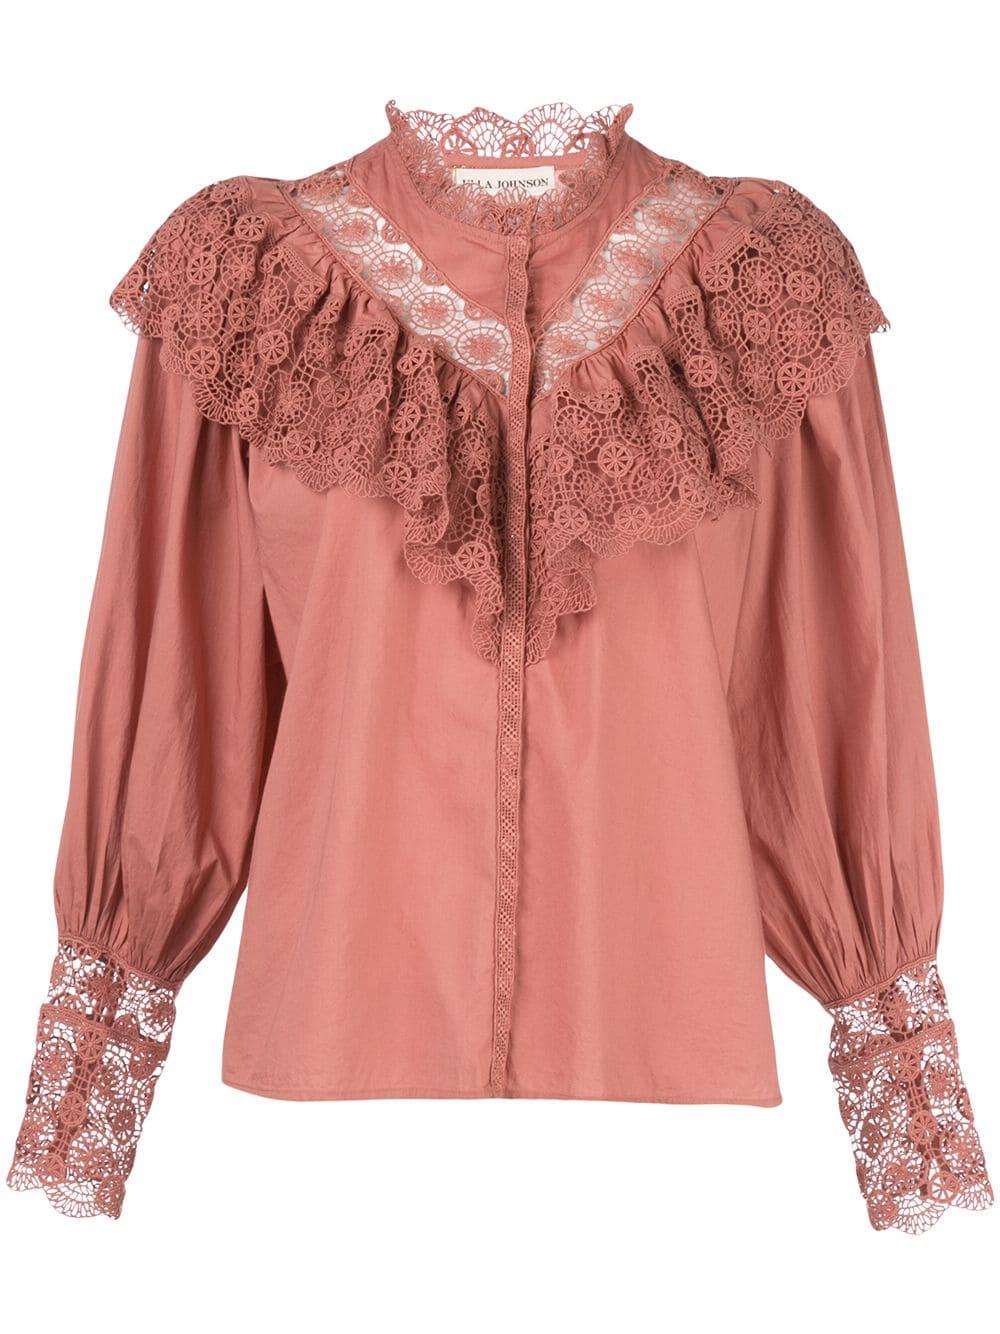 Ulla Johnson Ethel Lace-trimmed Blouse in Red - Lyst